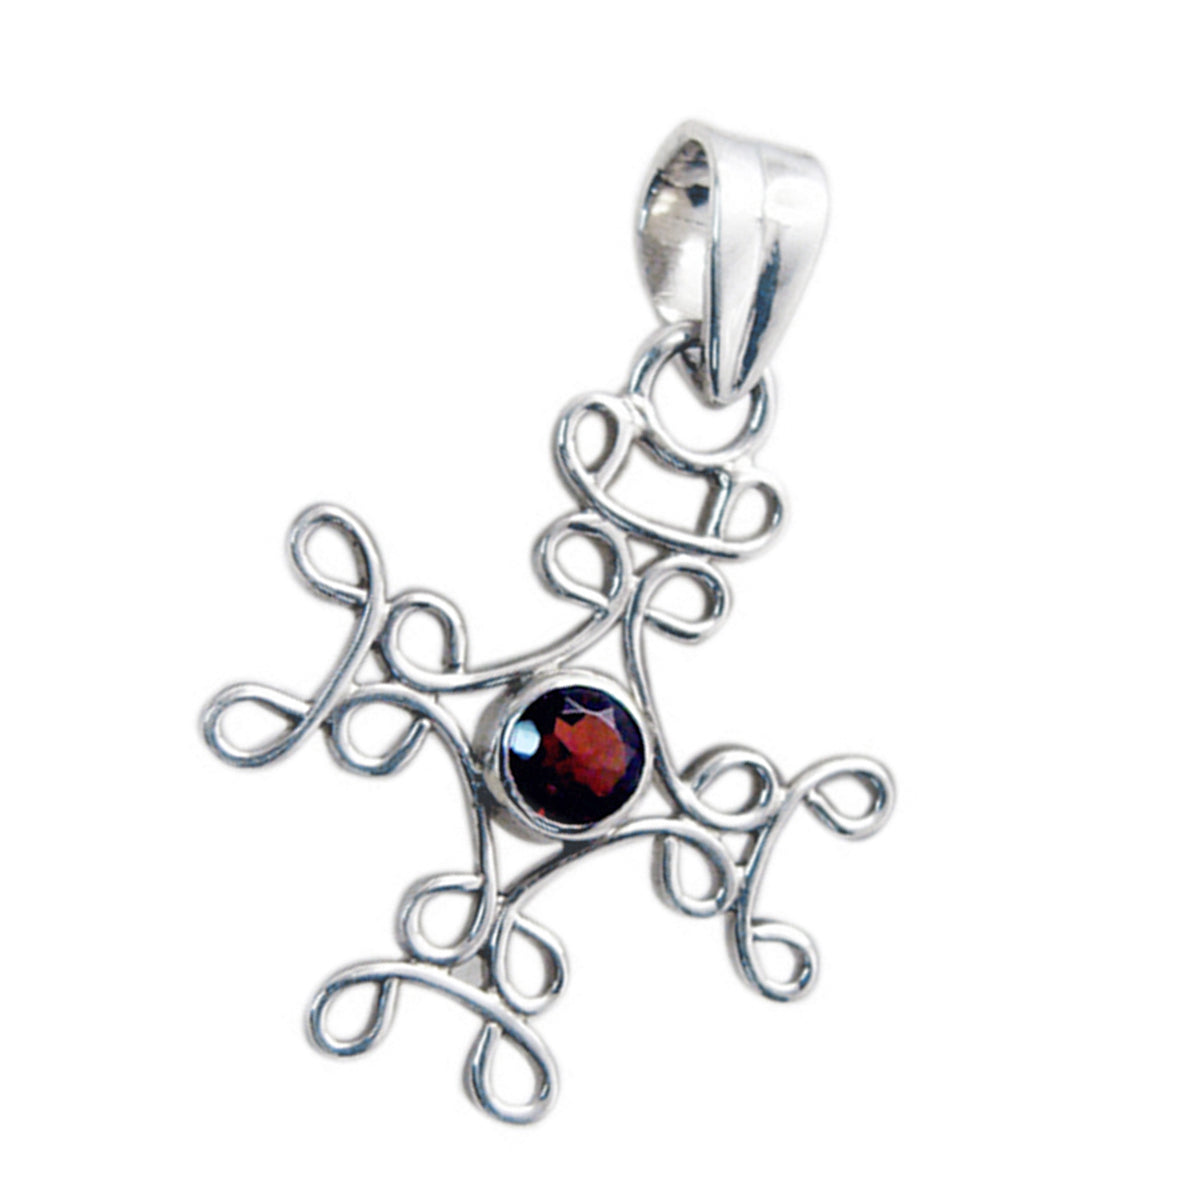 Riyo Drop Gems Round Faceted Red Garnet Solid Silver Pendant Gift For Good Friday